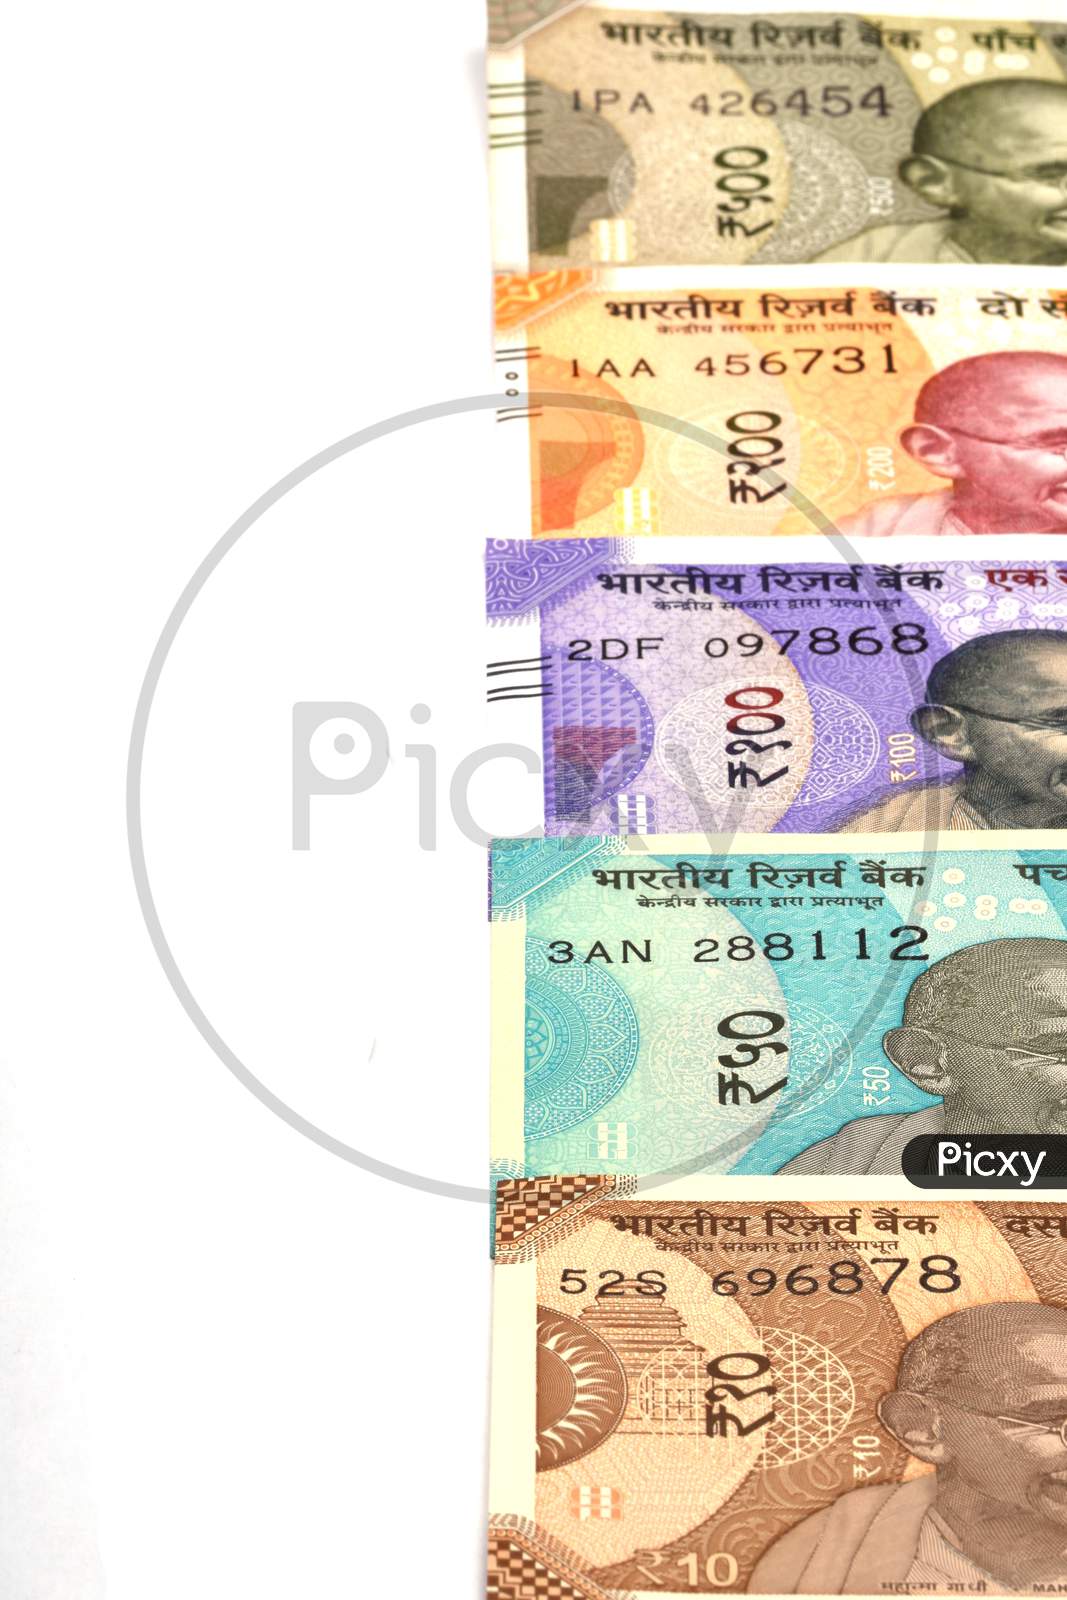 New Indian Money Over White Isolated Background, Indian Currency, Rupee, Indian Rupee,Indian Money, Business, Finance, Investment, Saving And Corruption Concept - Image